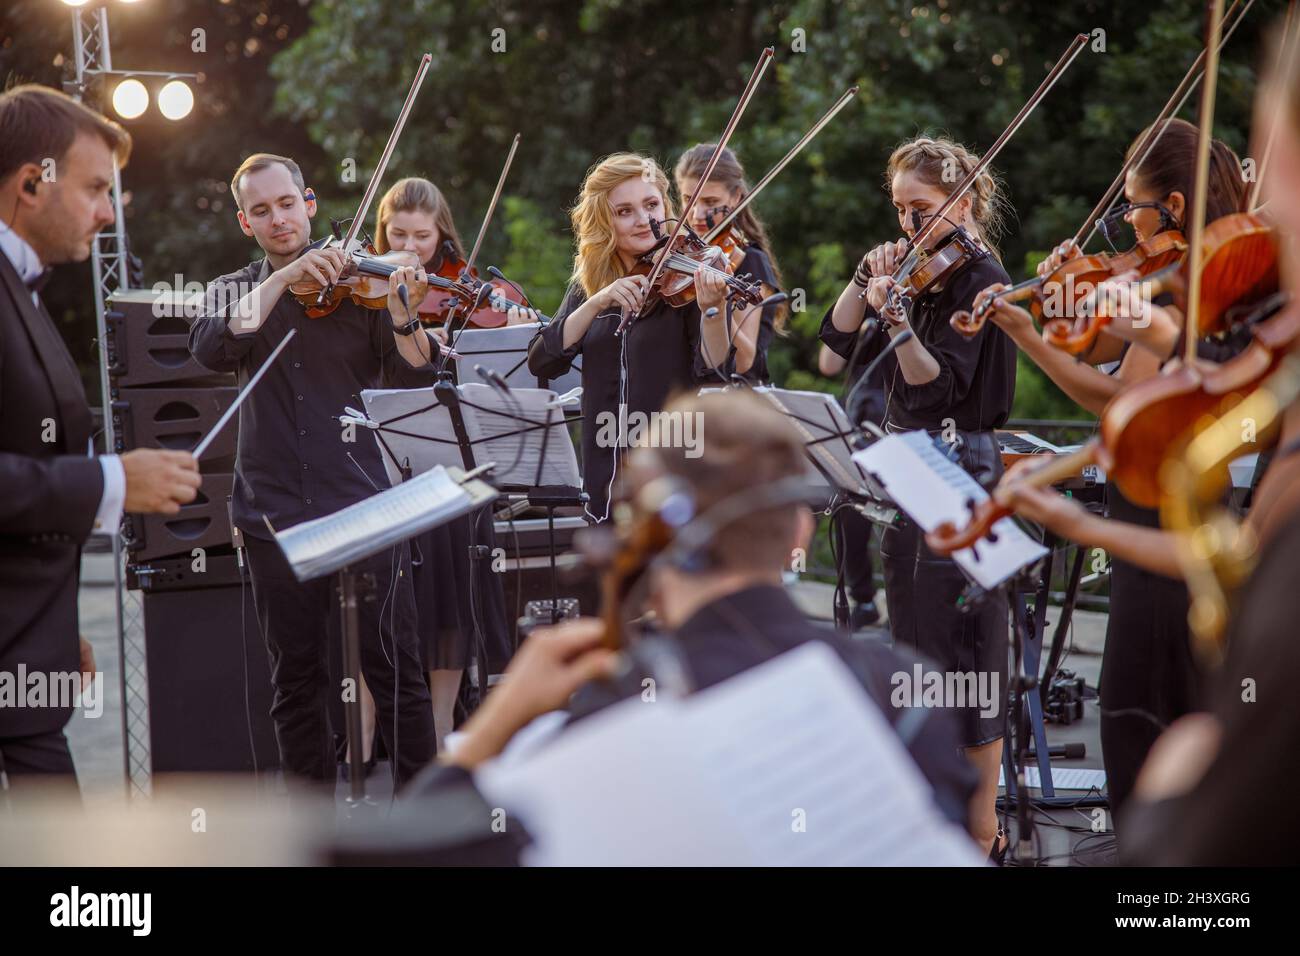 Violin players playing classic instrumental music outdoors Stock Photo